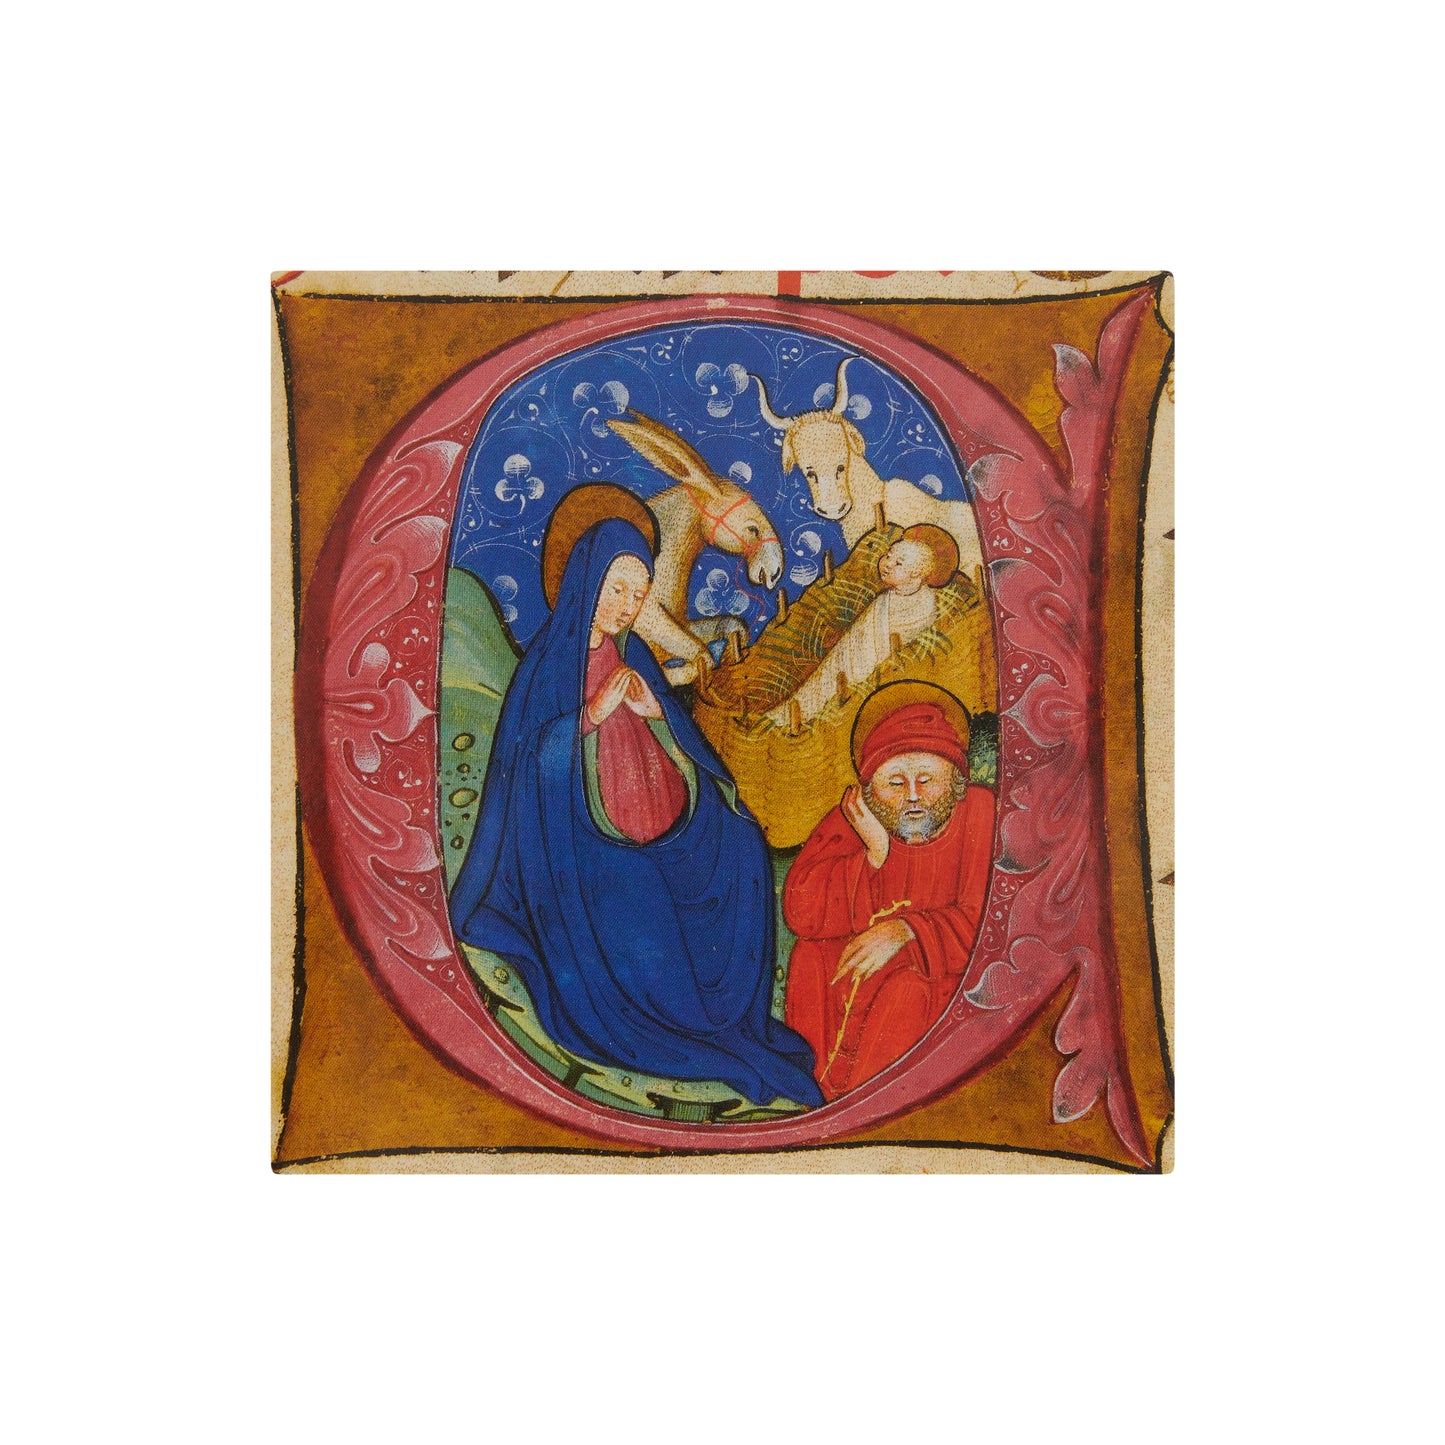 Small square Christmas card - Illuminated letter with nativity scene from an illuminated manuscript. From the collection of the Fitzwilliam Museum.